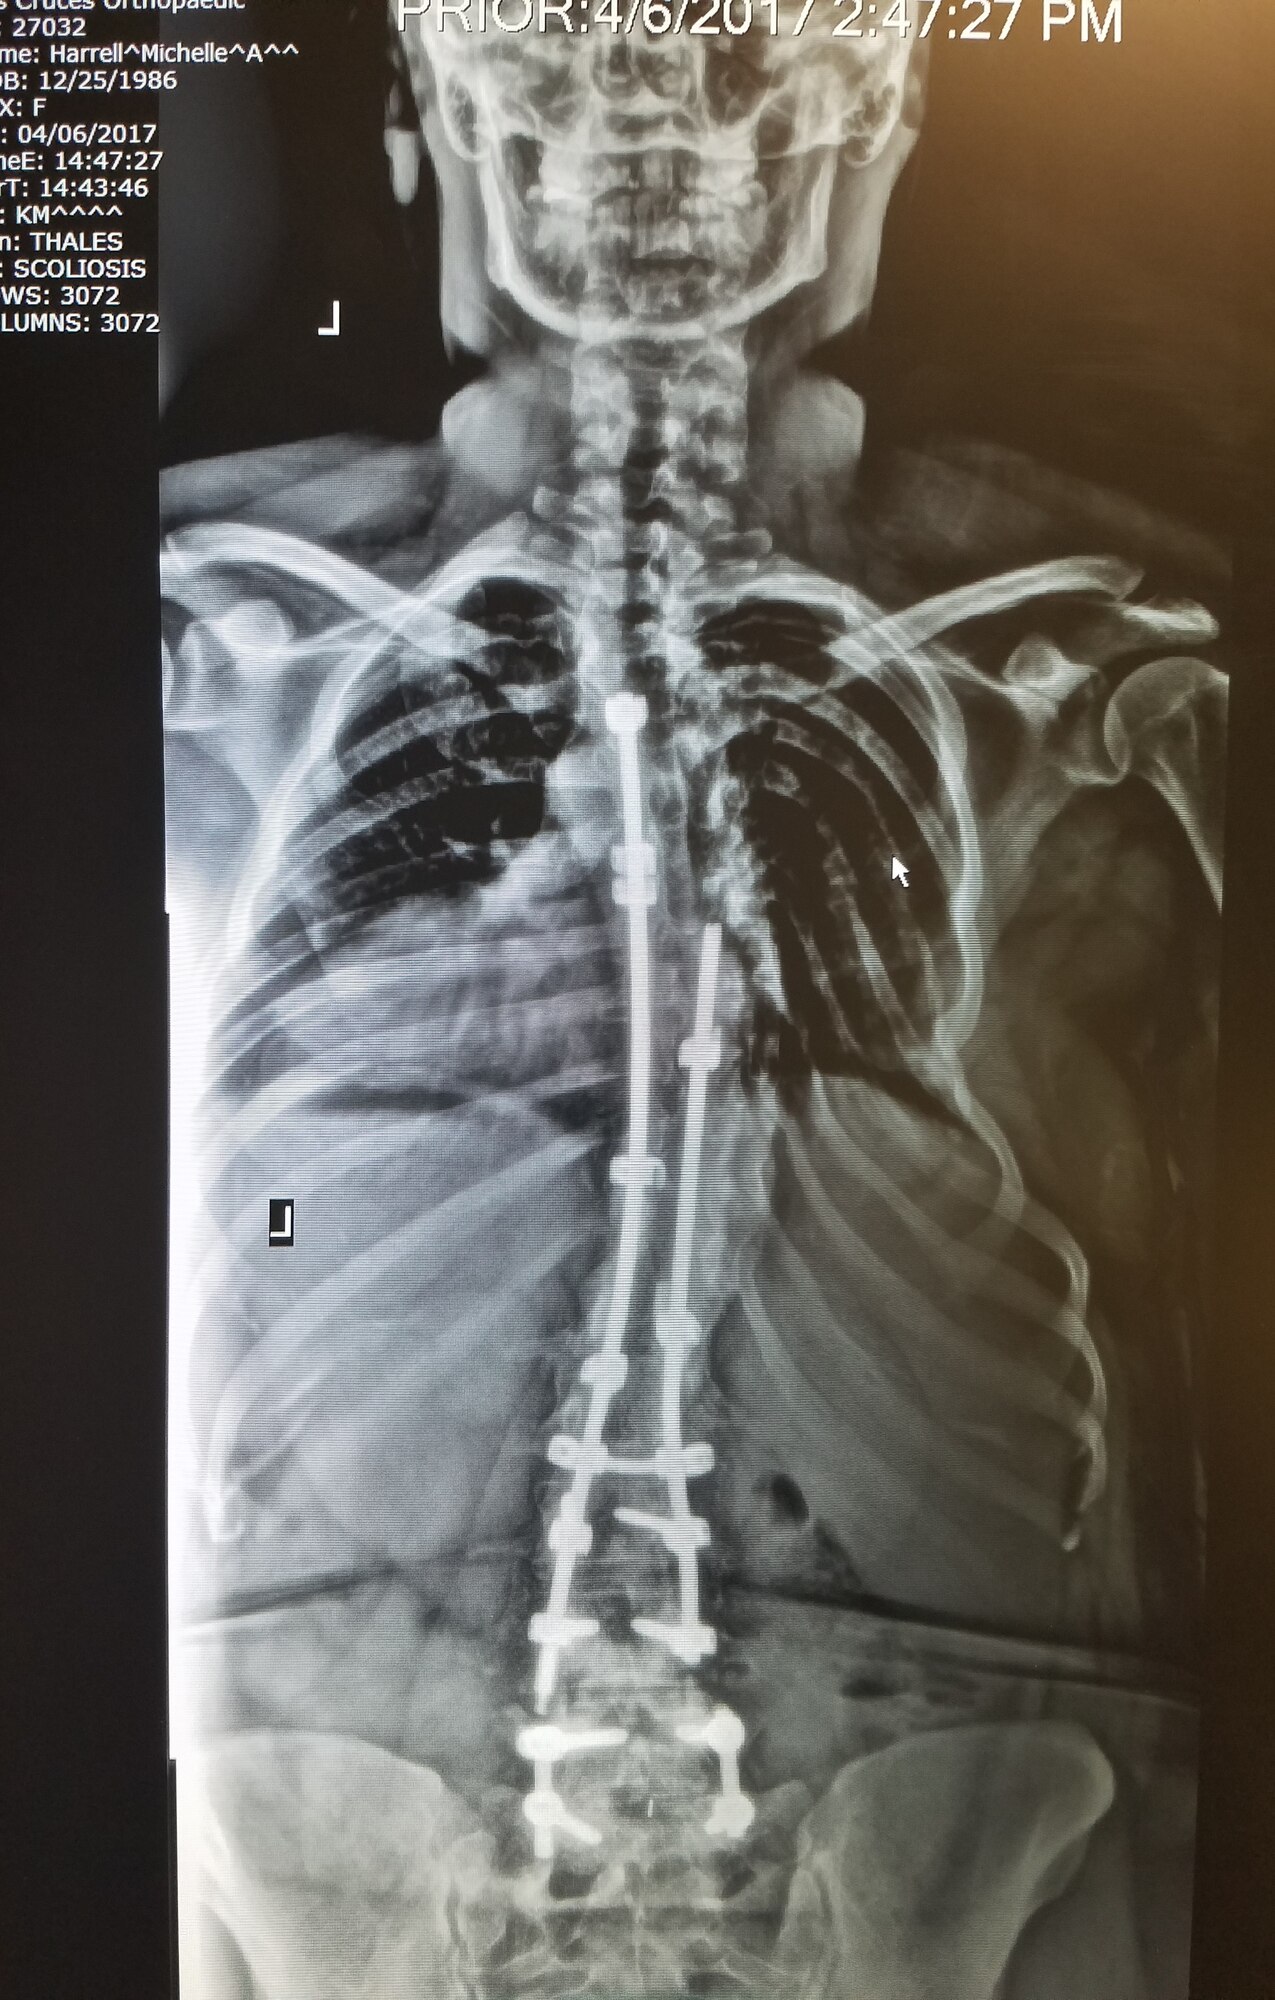 An X-ray photo of Michelle Harrell displaying the metal implants in her spine from her previous surgeries taken on April 6, 2017. (Courtesy photo)